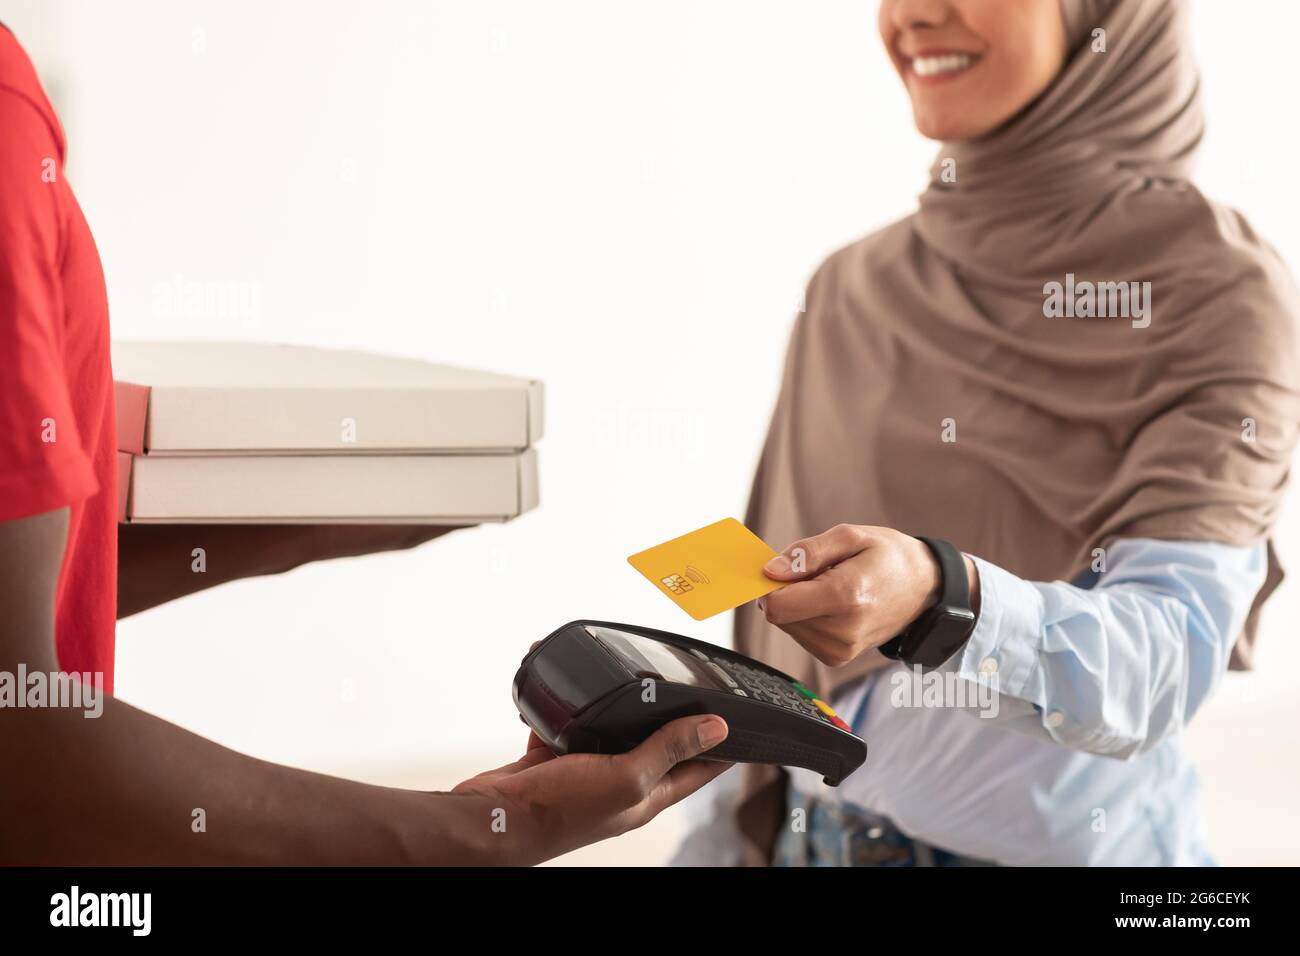 Deliveryman holding POS machine, muslim client paying with card Stock Photo